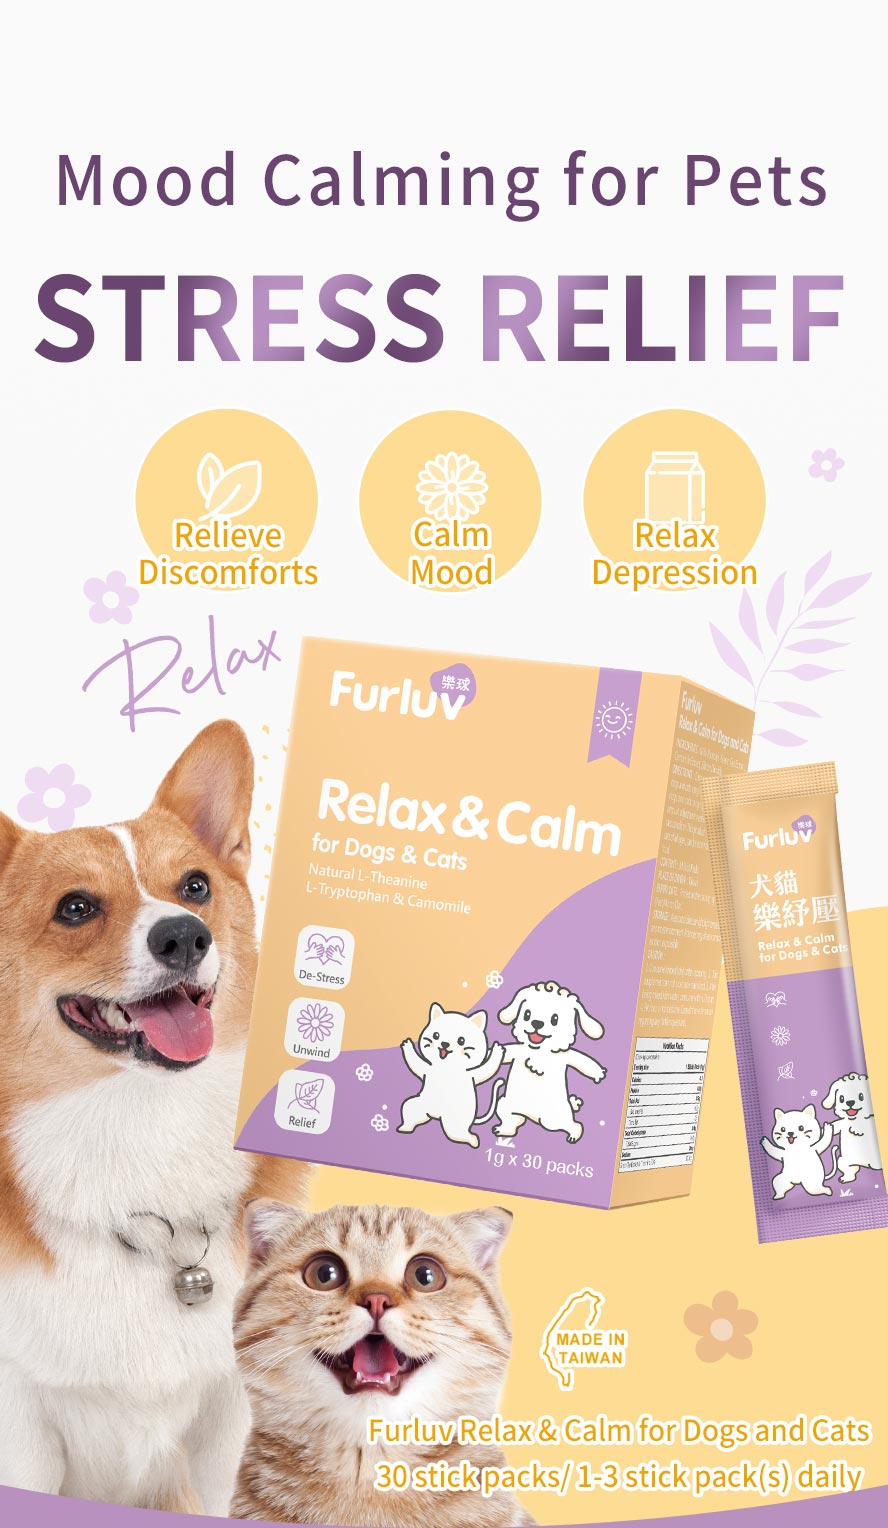 Furluv Relax & Calm for Dogs and Cats can help pets to stress relieve, calm mood and relax depression.